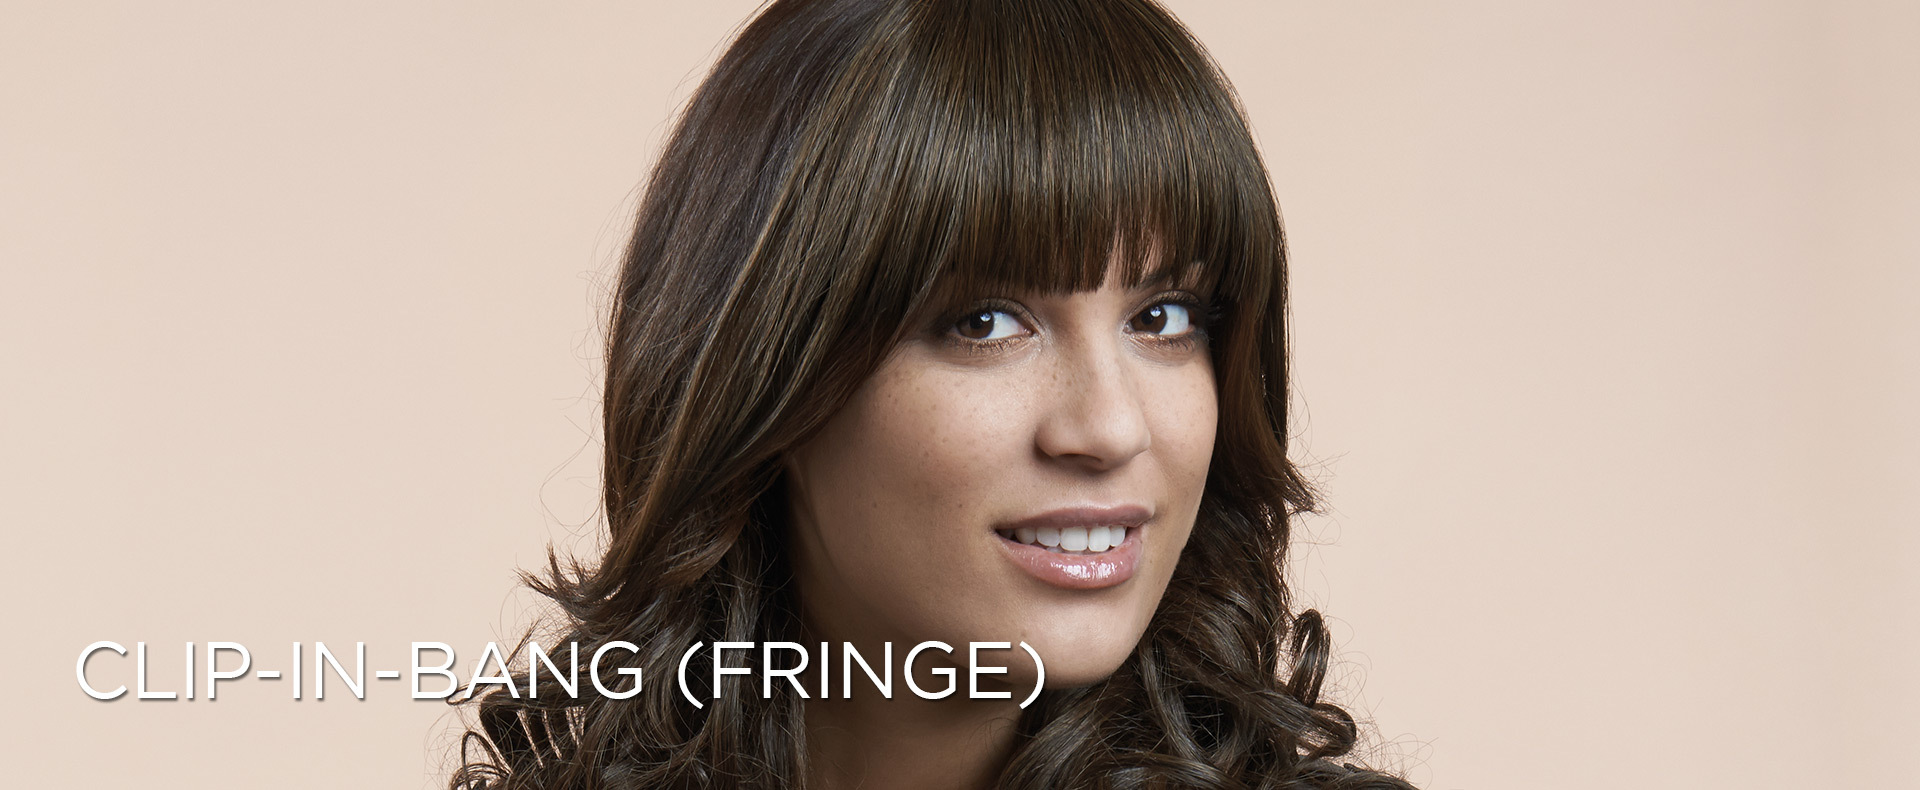 Clip-in-Bang (Fringe), Anabell mit Stirnfransen (© Great Lengths)